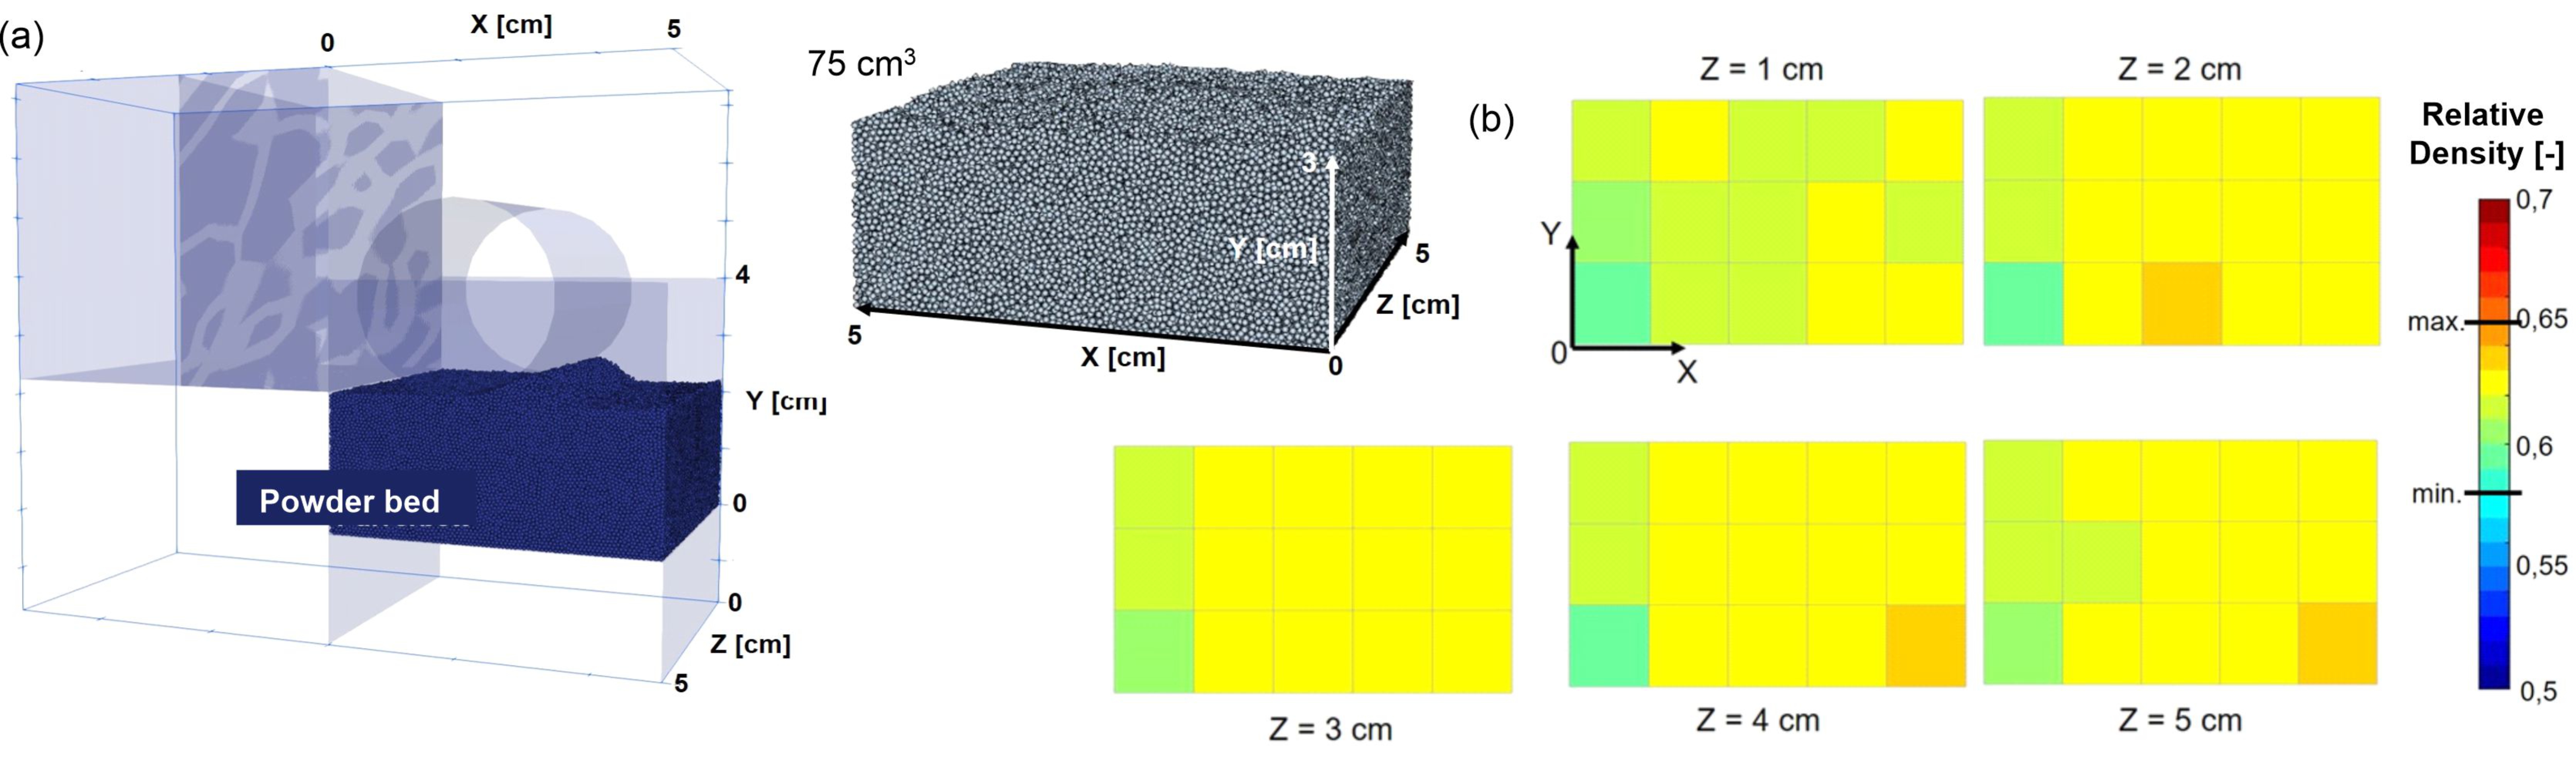 (a) powder spreading on the powder bed during a binder jetting process; (b) the powder density distribution of different cross sections in the powder bed.